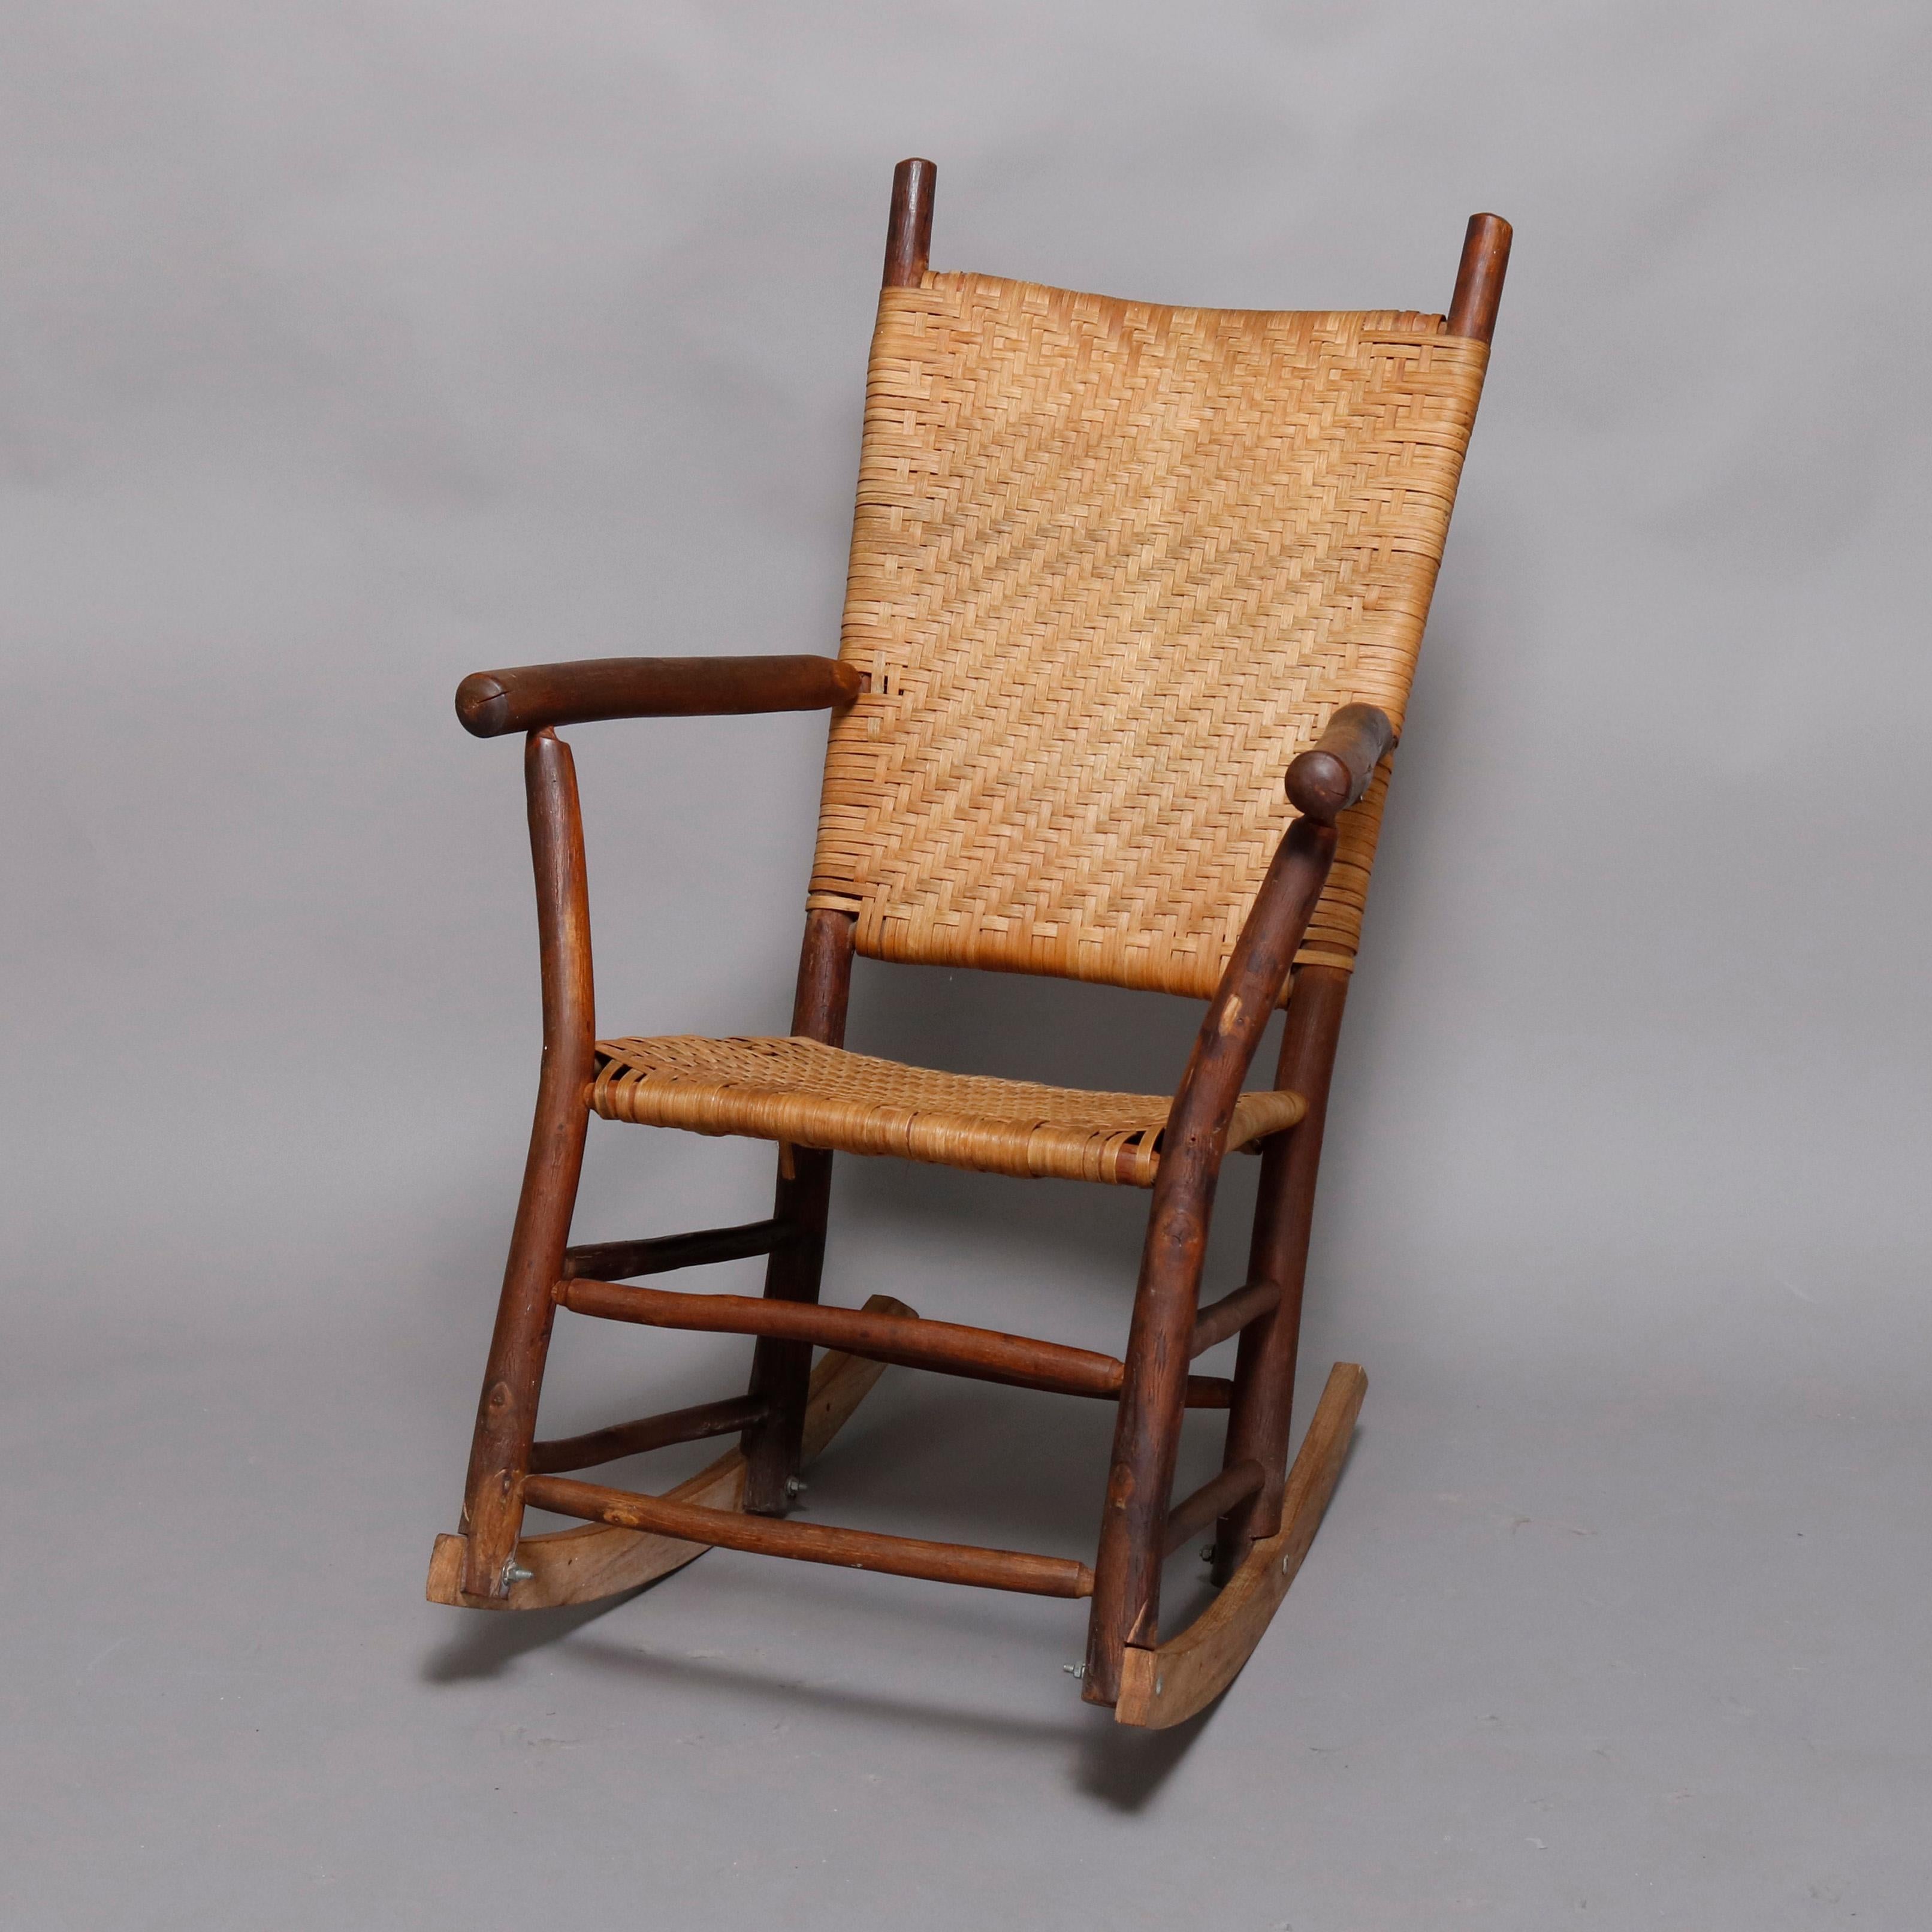 An antique and Primitive style Old Hickory School 3-piece porch set offers stick form armchair, rocker and settee having caned seats and backs, circa 1910

***DELIVERY NOTICE – Due to COVID-19 we are employing NO-CONTACT PRACTICES in the transfer of